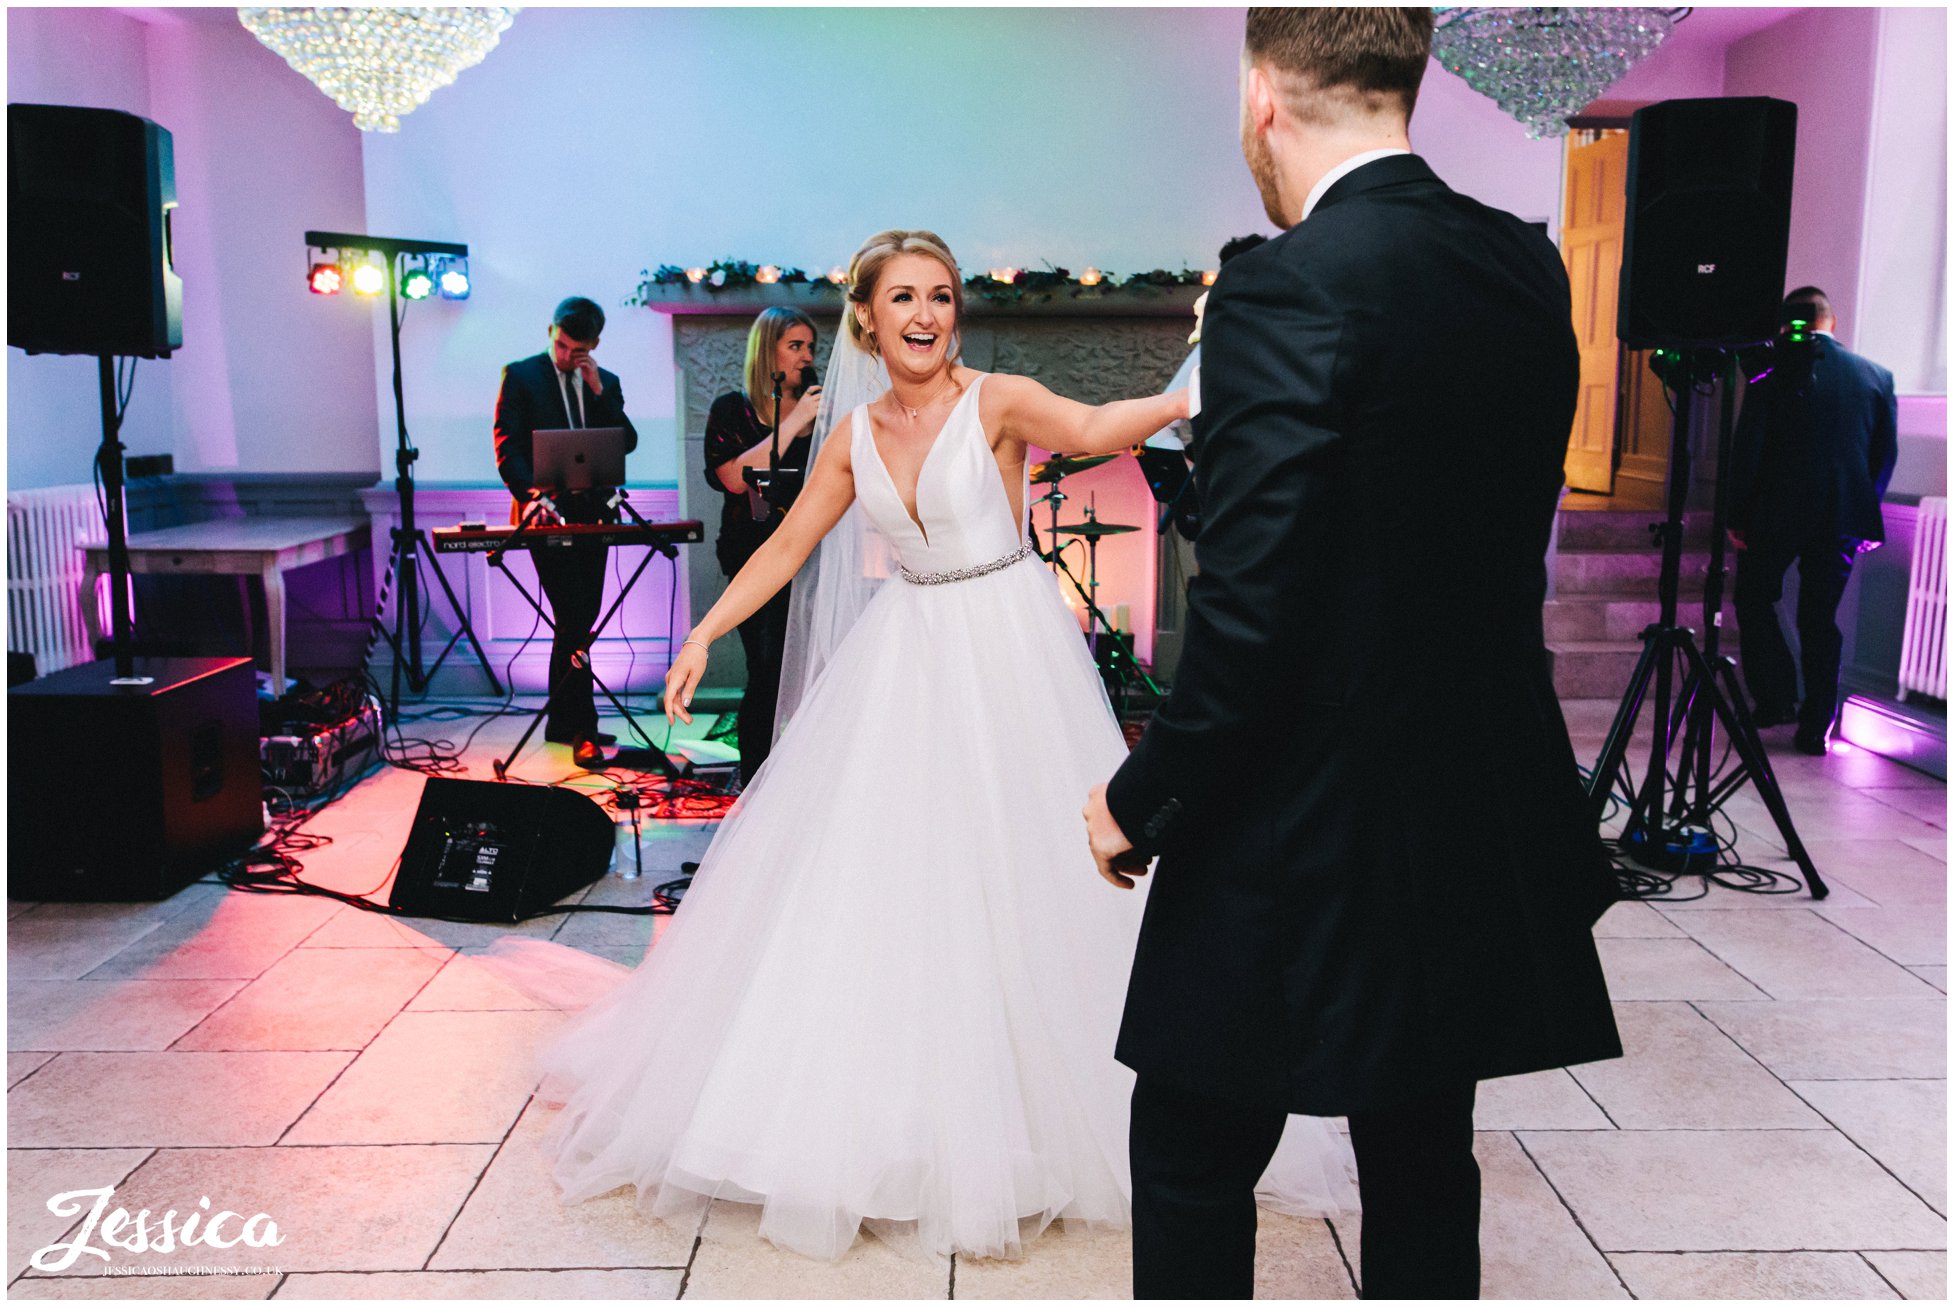 the bride &amp; groom share their first dance